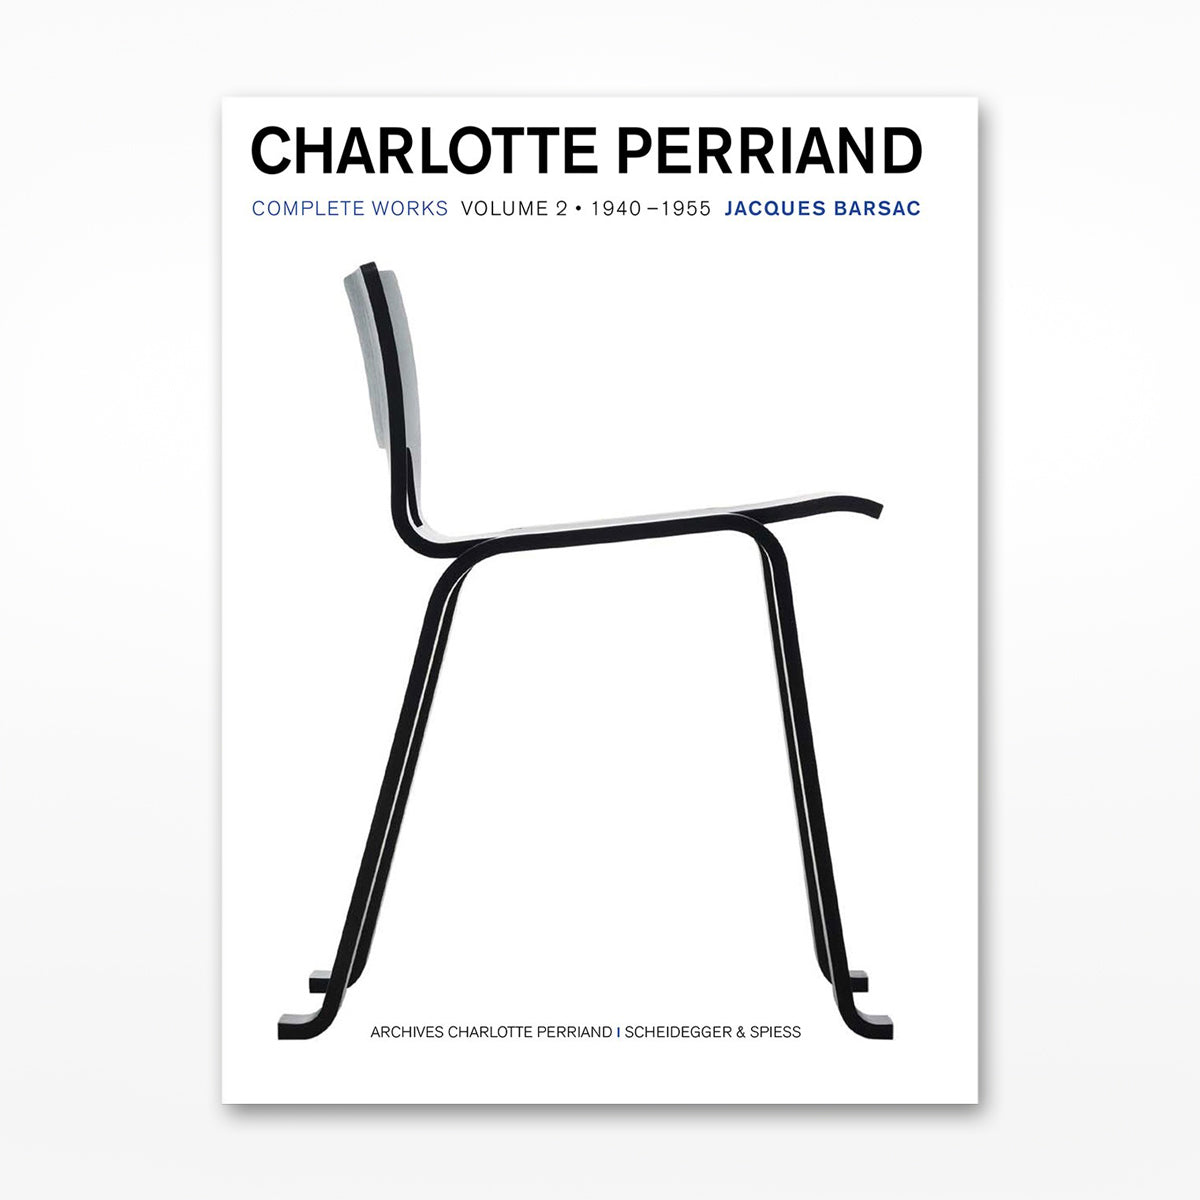 Review: Charlotte Perriand at the Design Museum